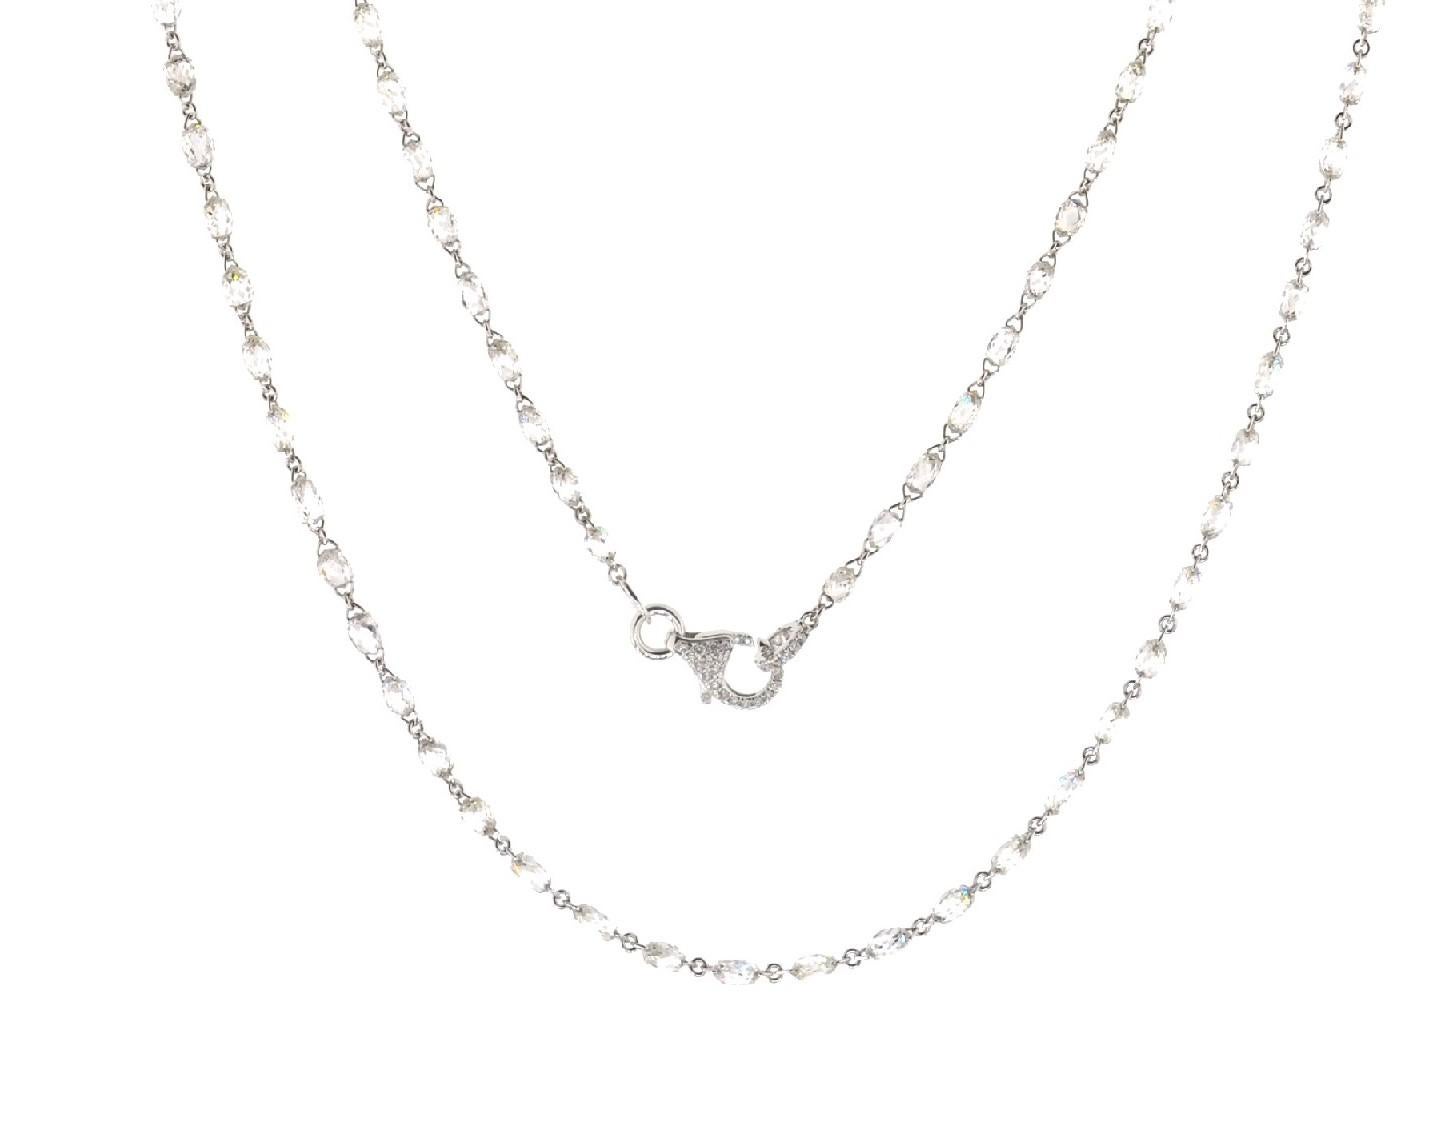 JR 27.51 Carat white Diamond Briolette Necklace

The Necklace having 148pcs White Diamond Briolette , Total Diamond weight is 27.51 carats. Clasp is Specially made with Pave Diamond setting. It can be worn as long or wrapped twice around the